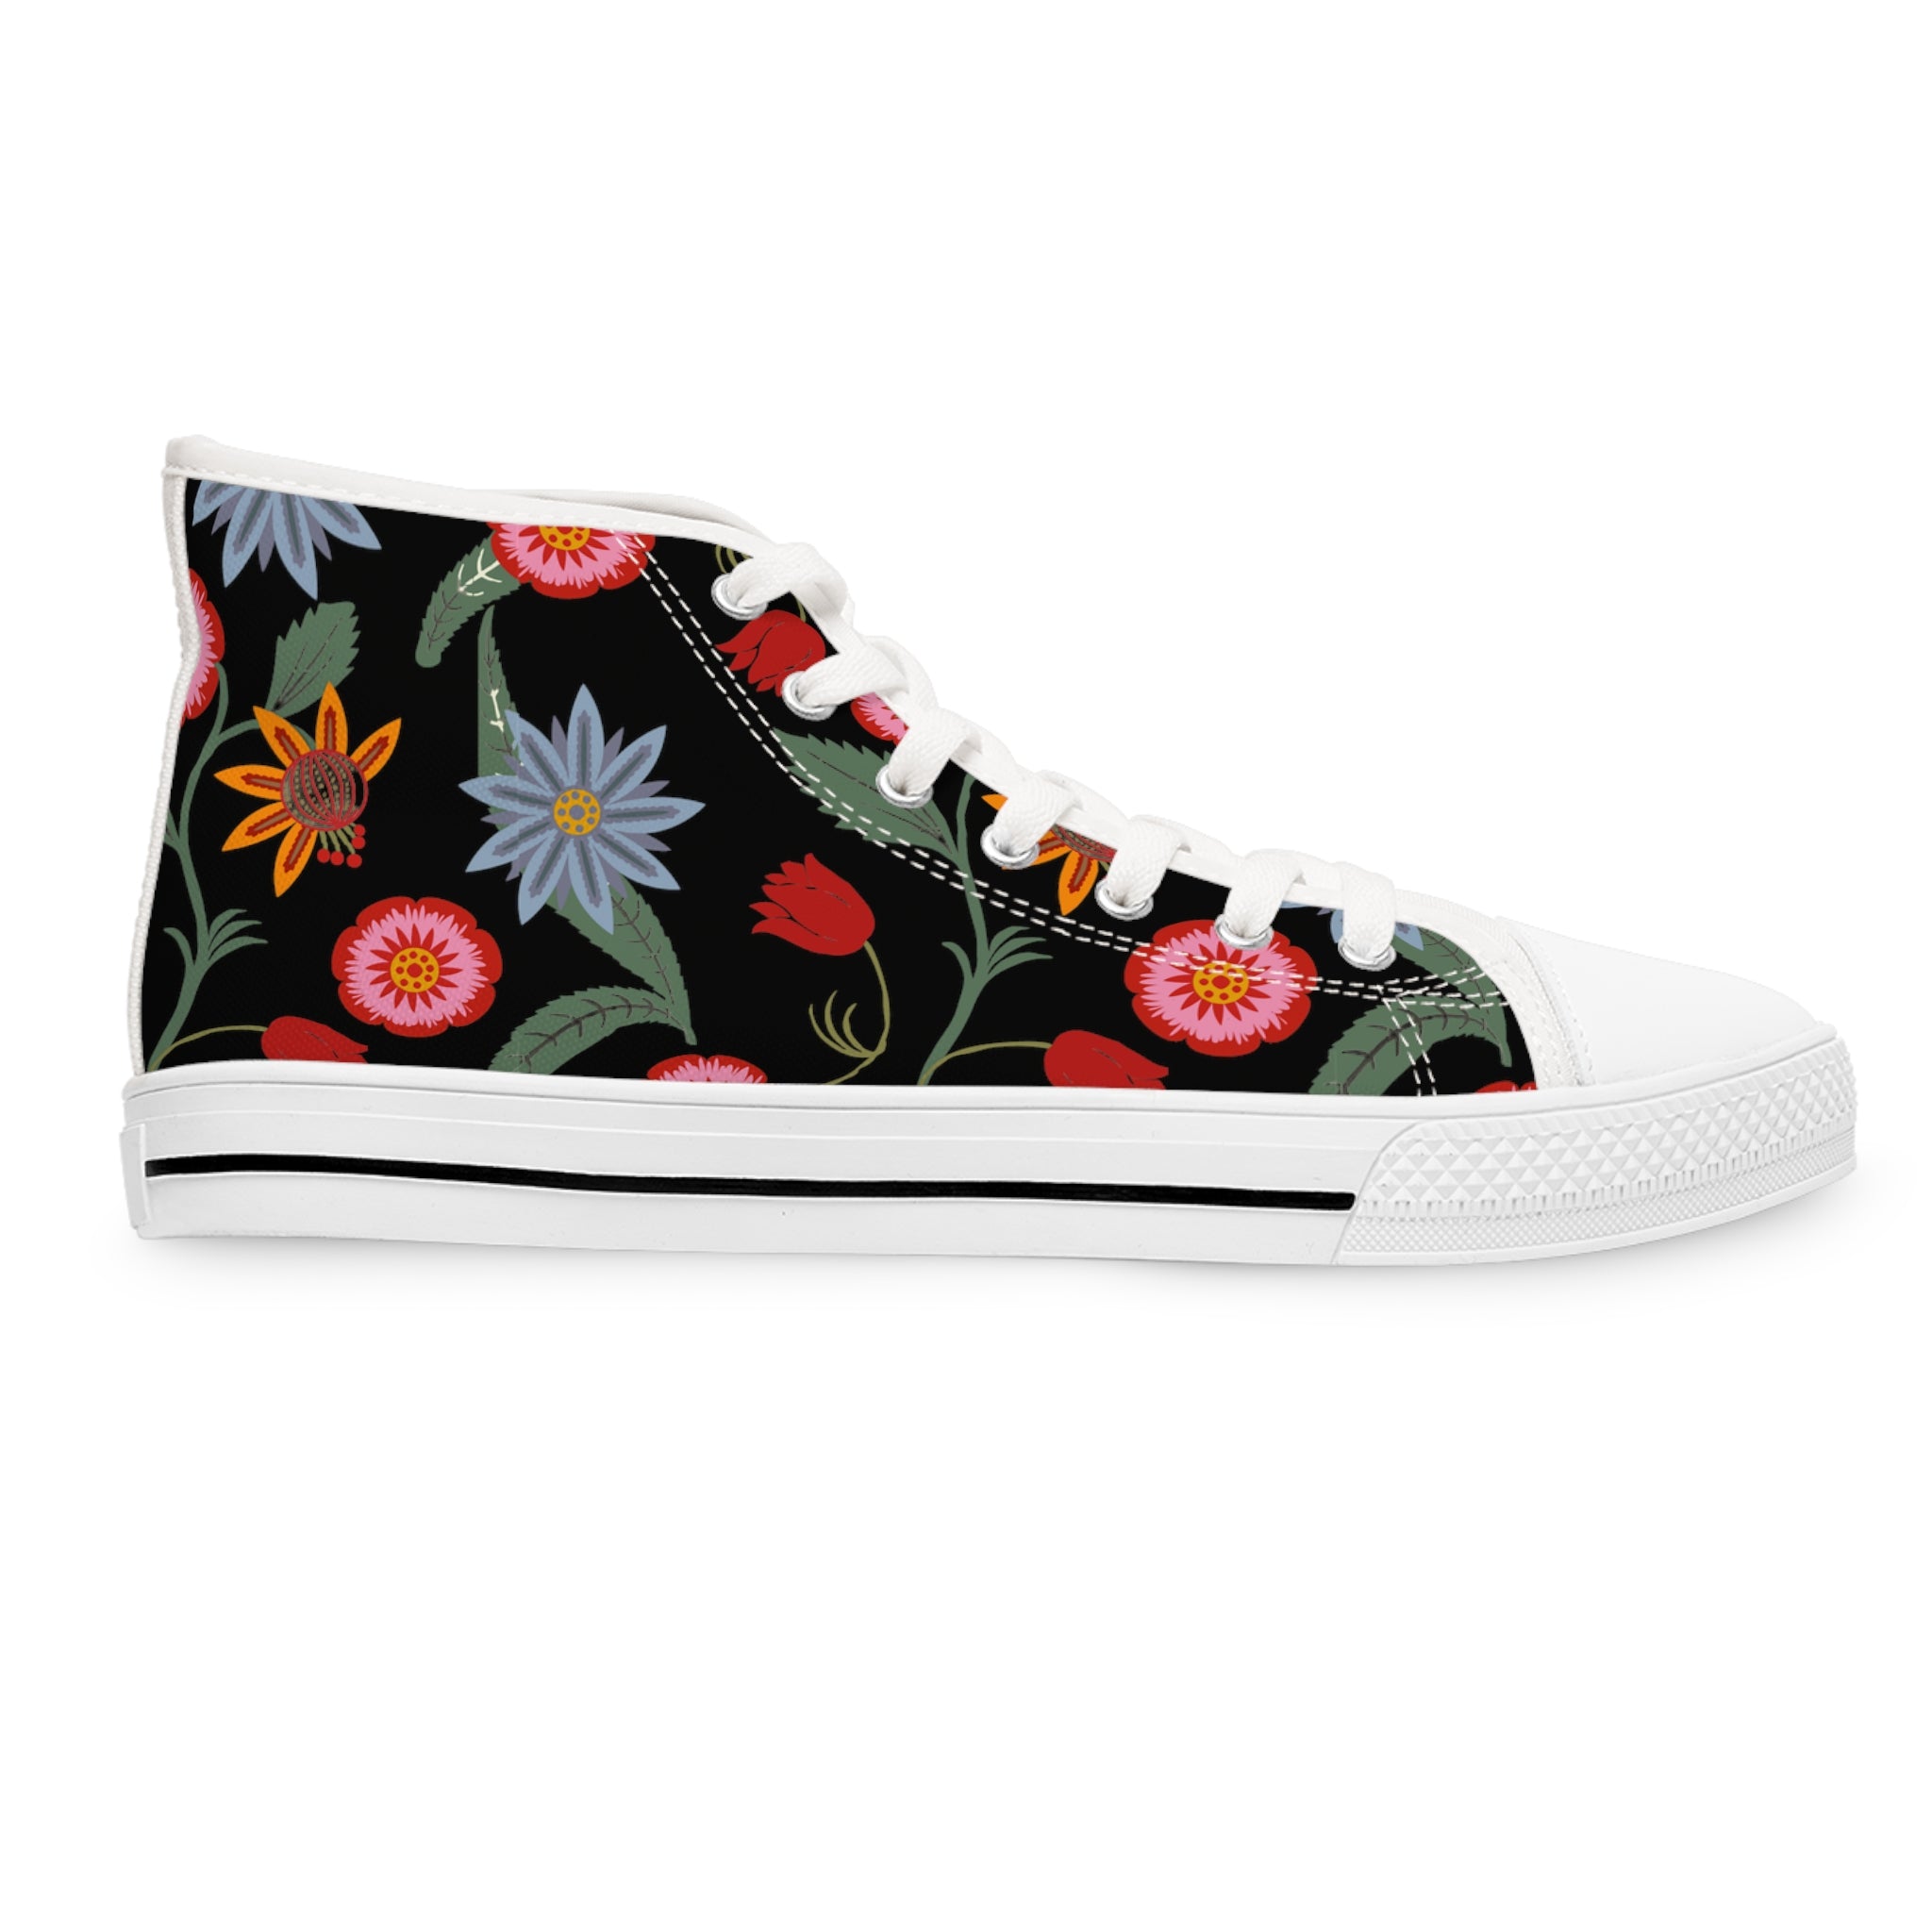 Women's Casual Wear Collection Stay Wild (Flowers) Women's High Top Sneakers, Ladies High-Tops